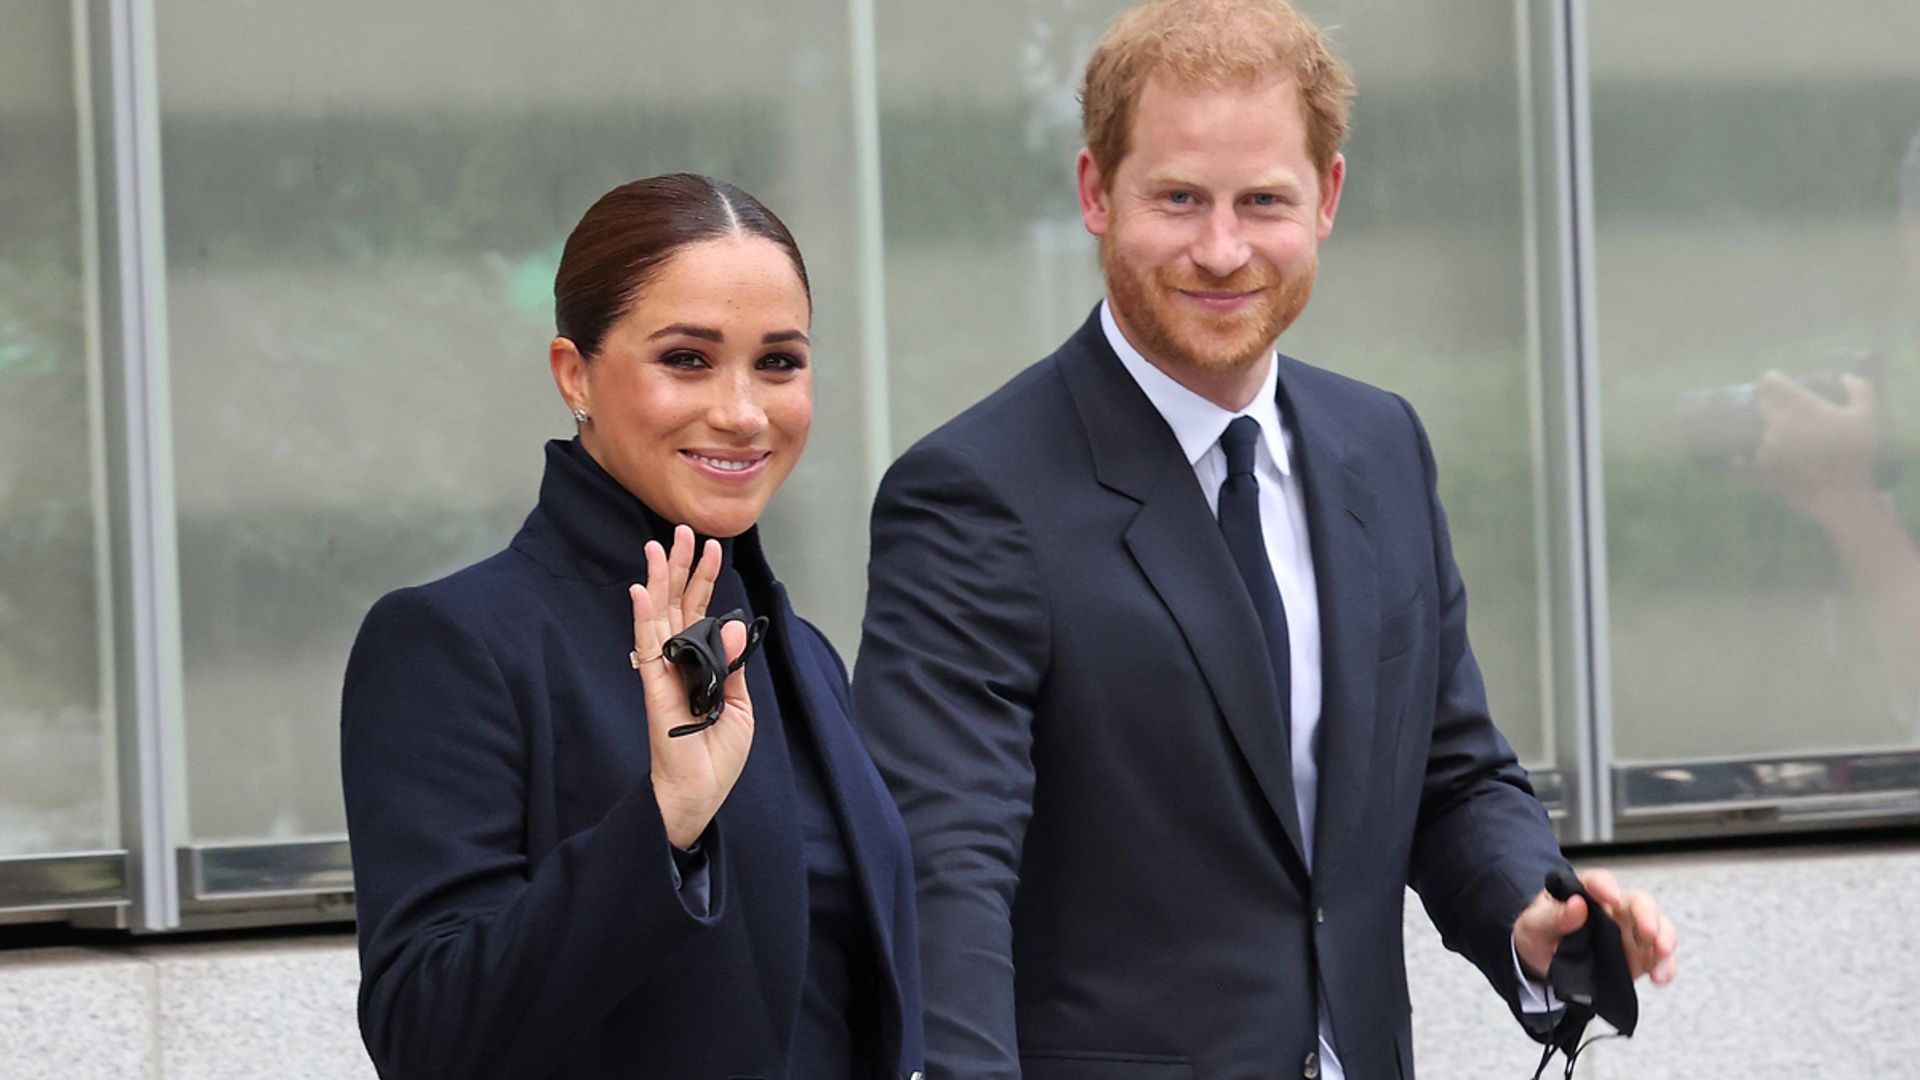 Prince Harry and Meghan Markle appear in new video – as Prince William and Kate Middleton embark on US tour